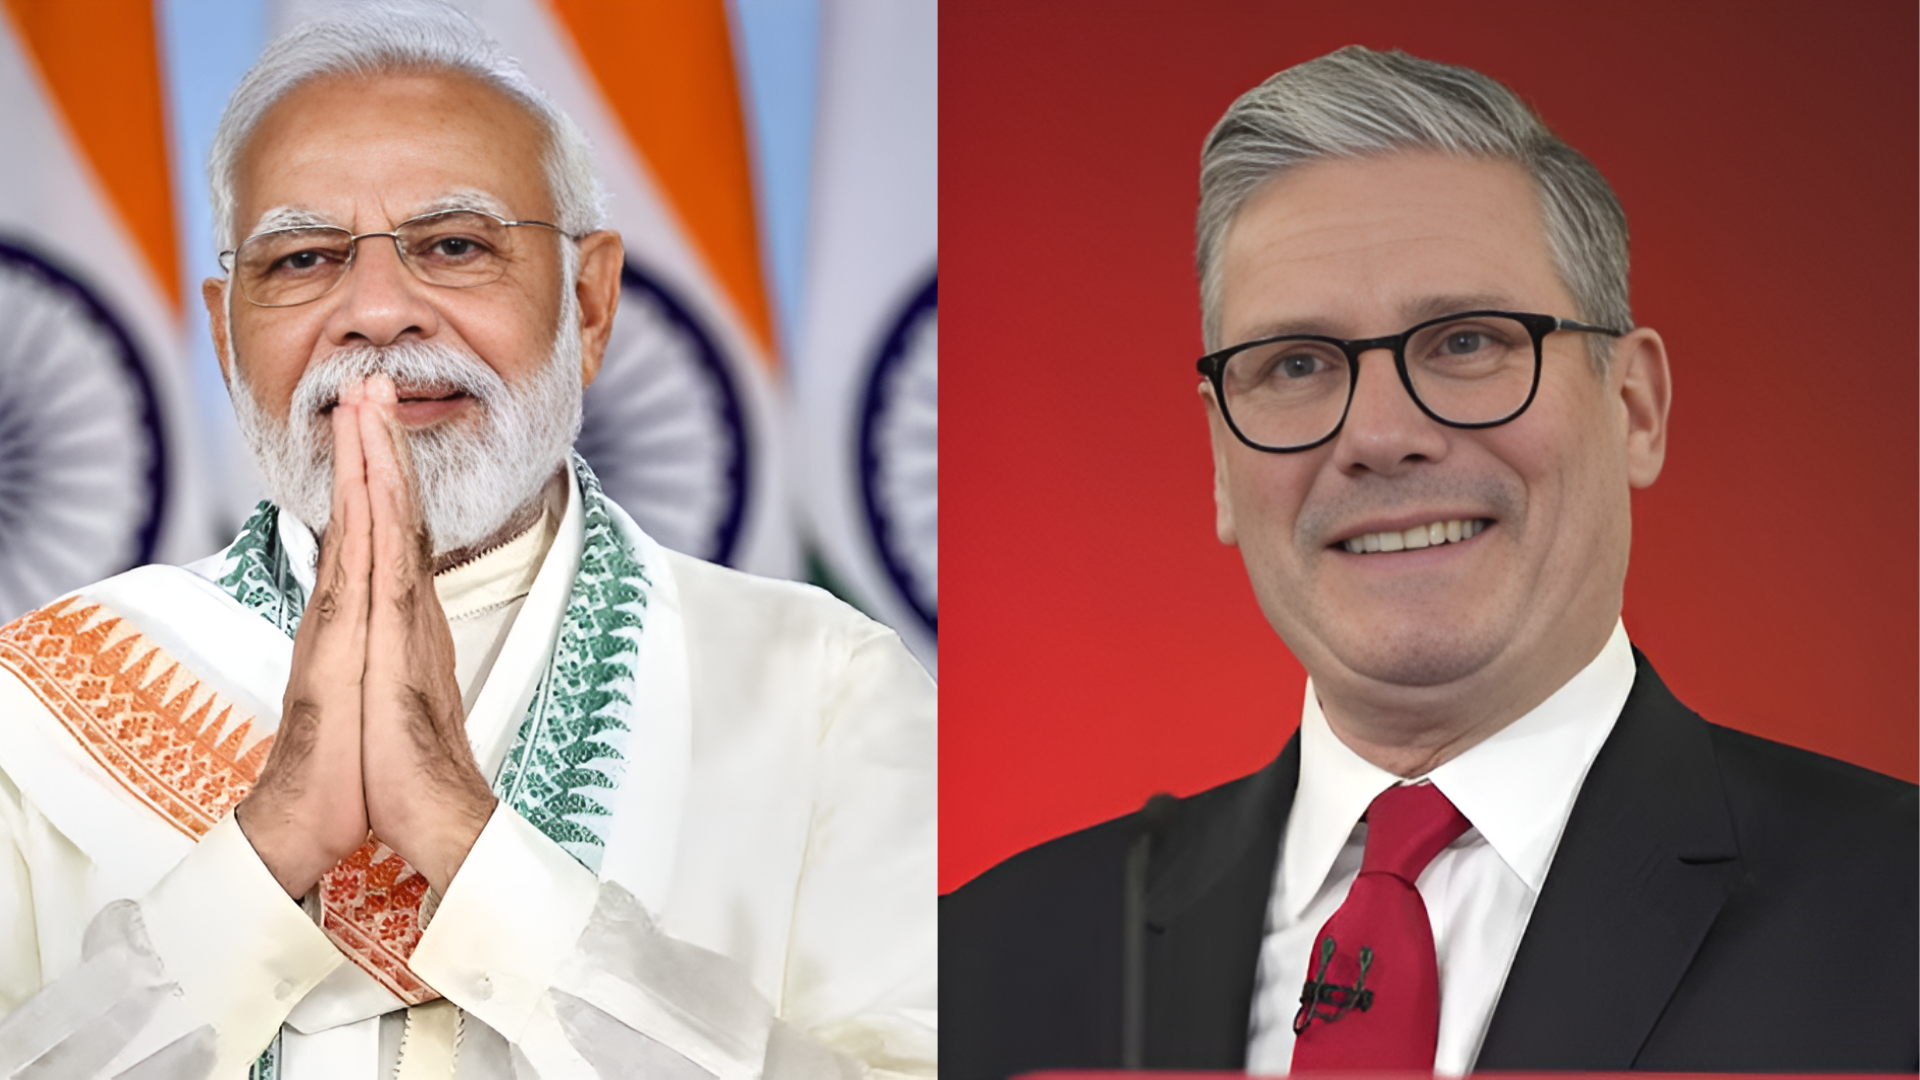 PM Modi And UK PM Starmer Commit To Fast-Track India-UK Free Trade Agreement